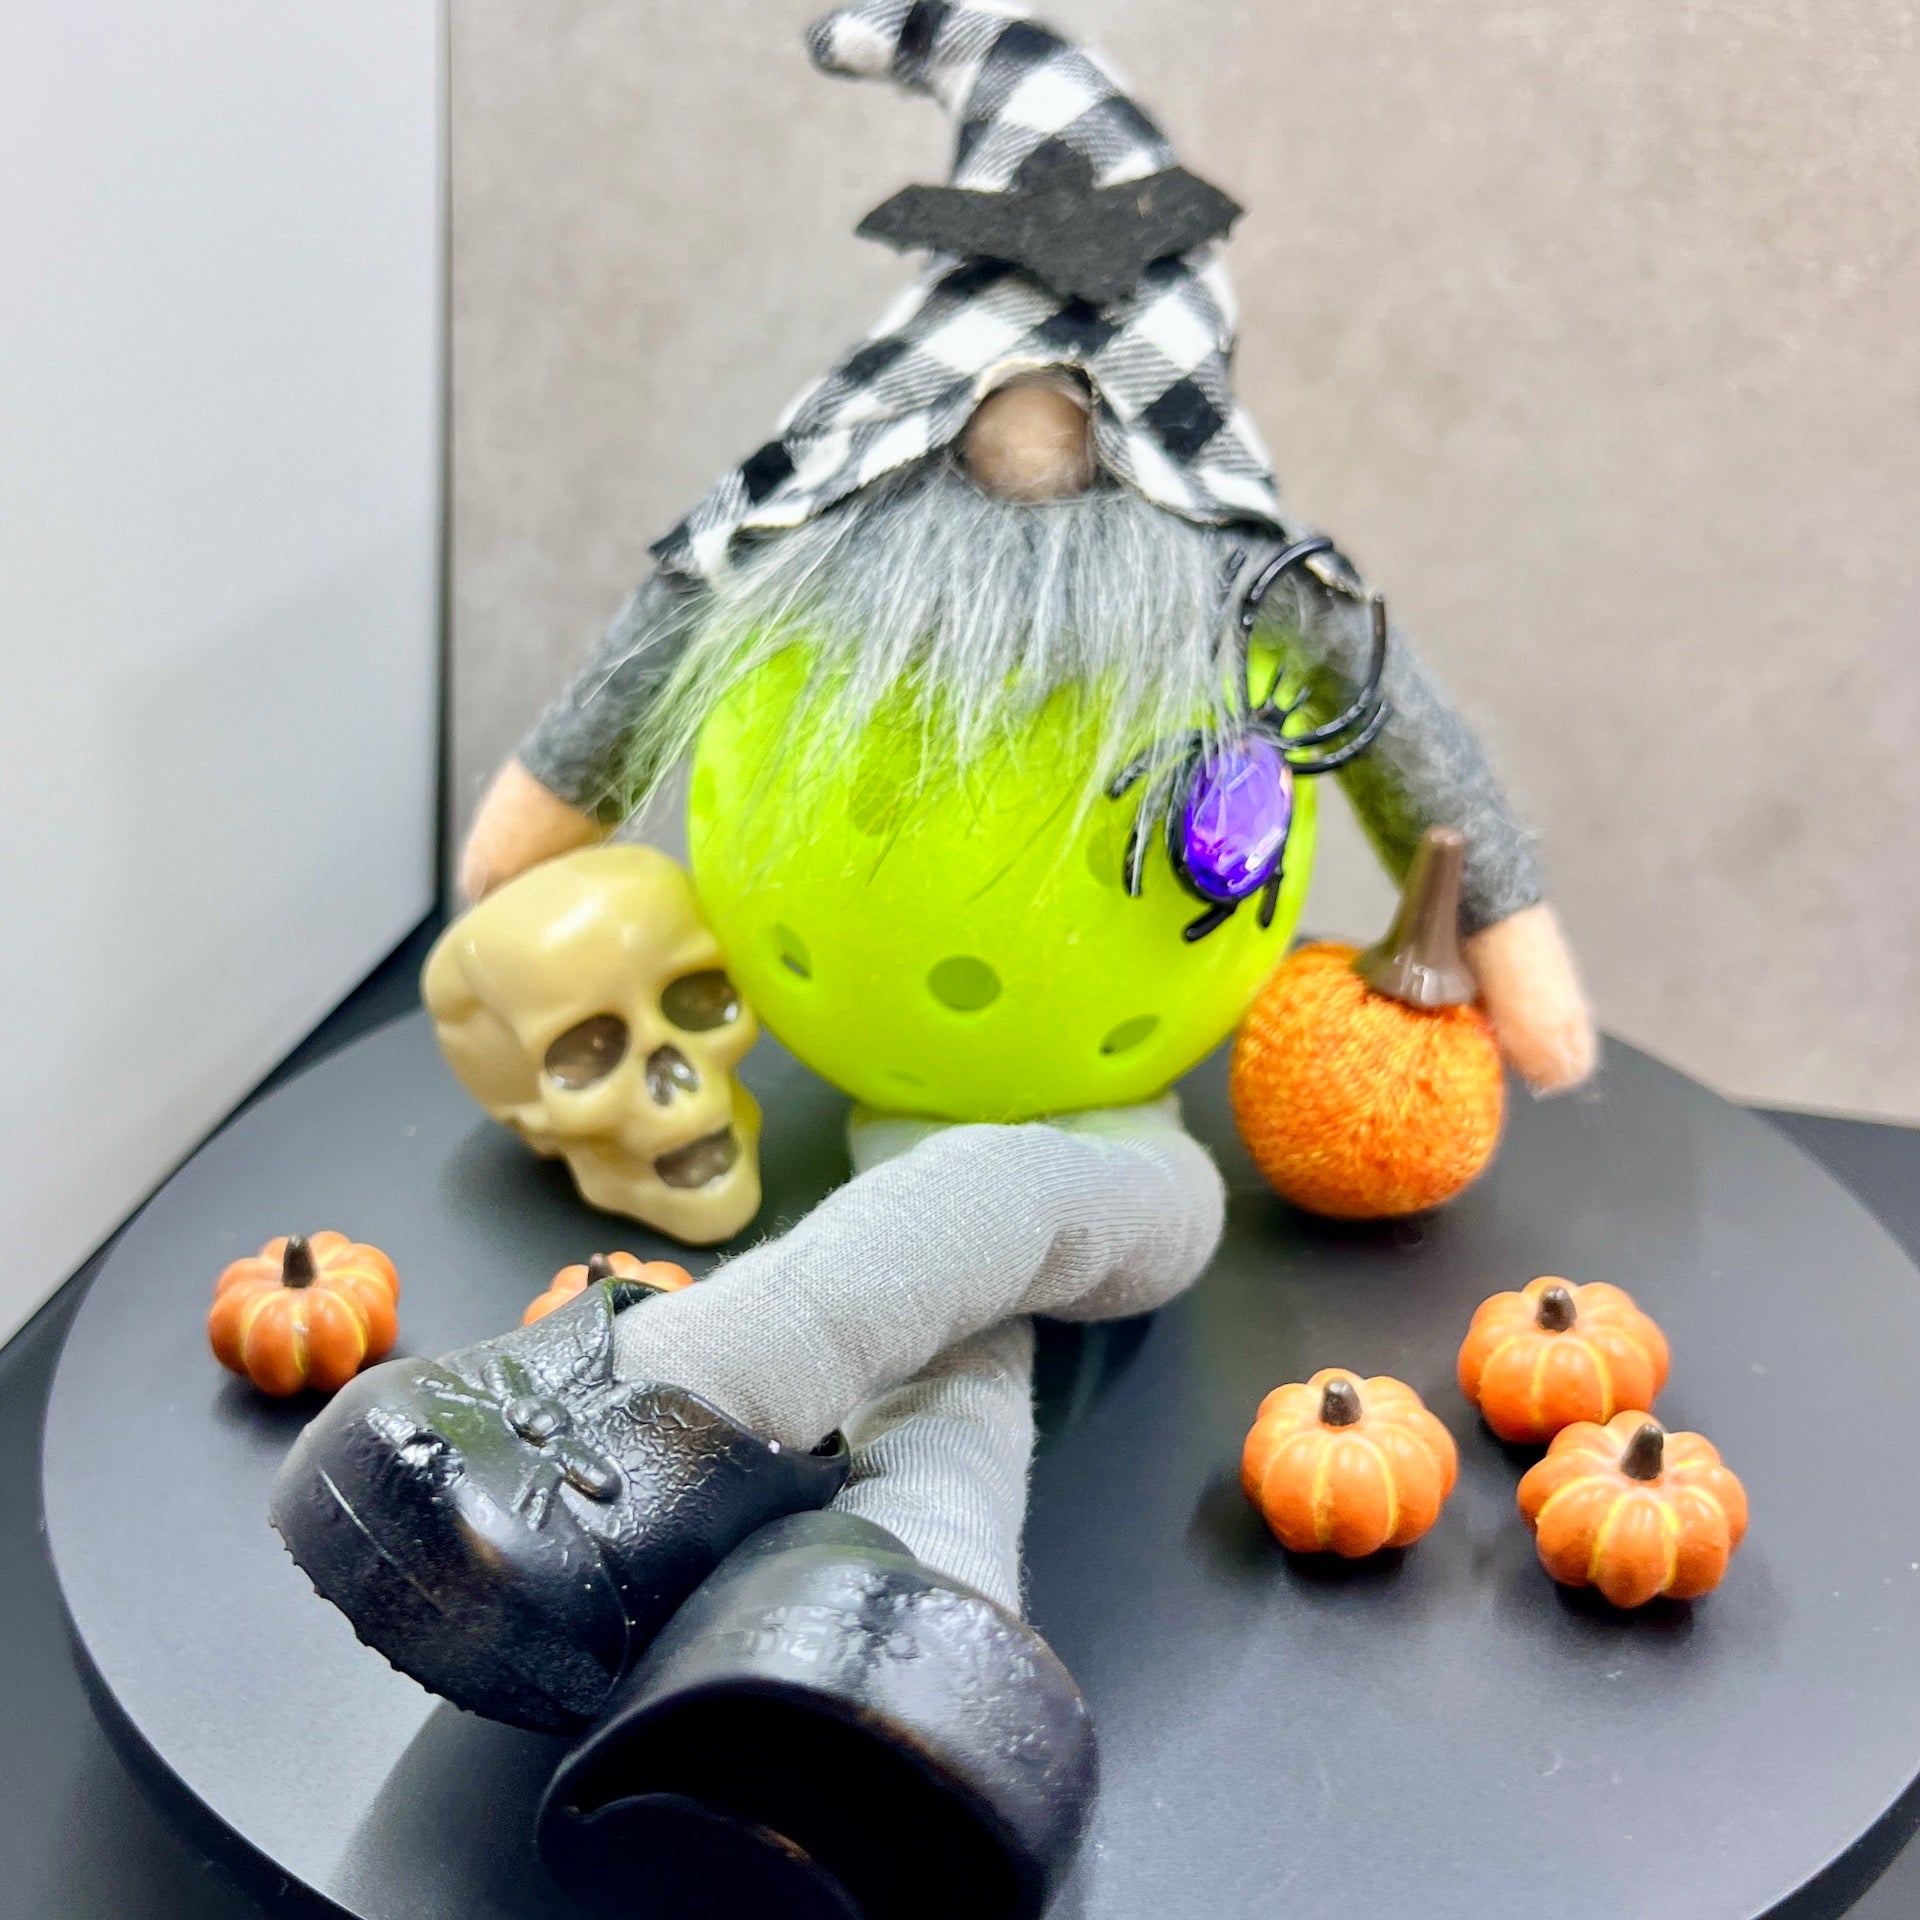 HALLOWEEN PICKLEBALL GNOME FOR THE HOLIDAY SEASON - DECORATION OR GIFT  These pickleball gnomes are perfect for decoration or gifts for your pickleball addicted friends. Each Pickleball Gnome's body is an upcycled full-sized pickleball with skull and pumpkin or skeleton adornments!! These Gnomes are the perfect gifts for all you pickleball lovers in your life!! Adding a Pickleball Gnome to your house only makes it better.